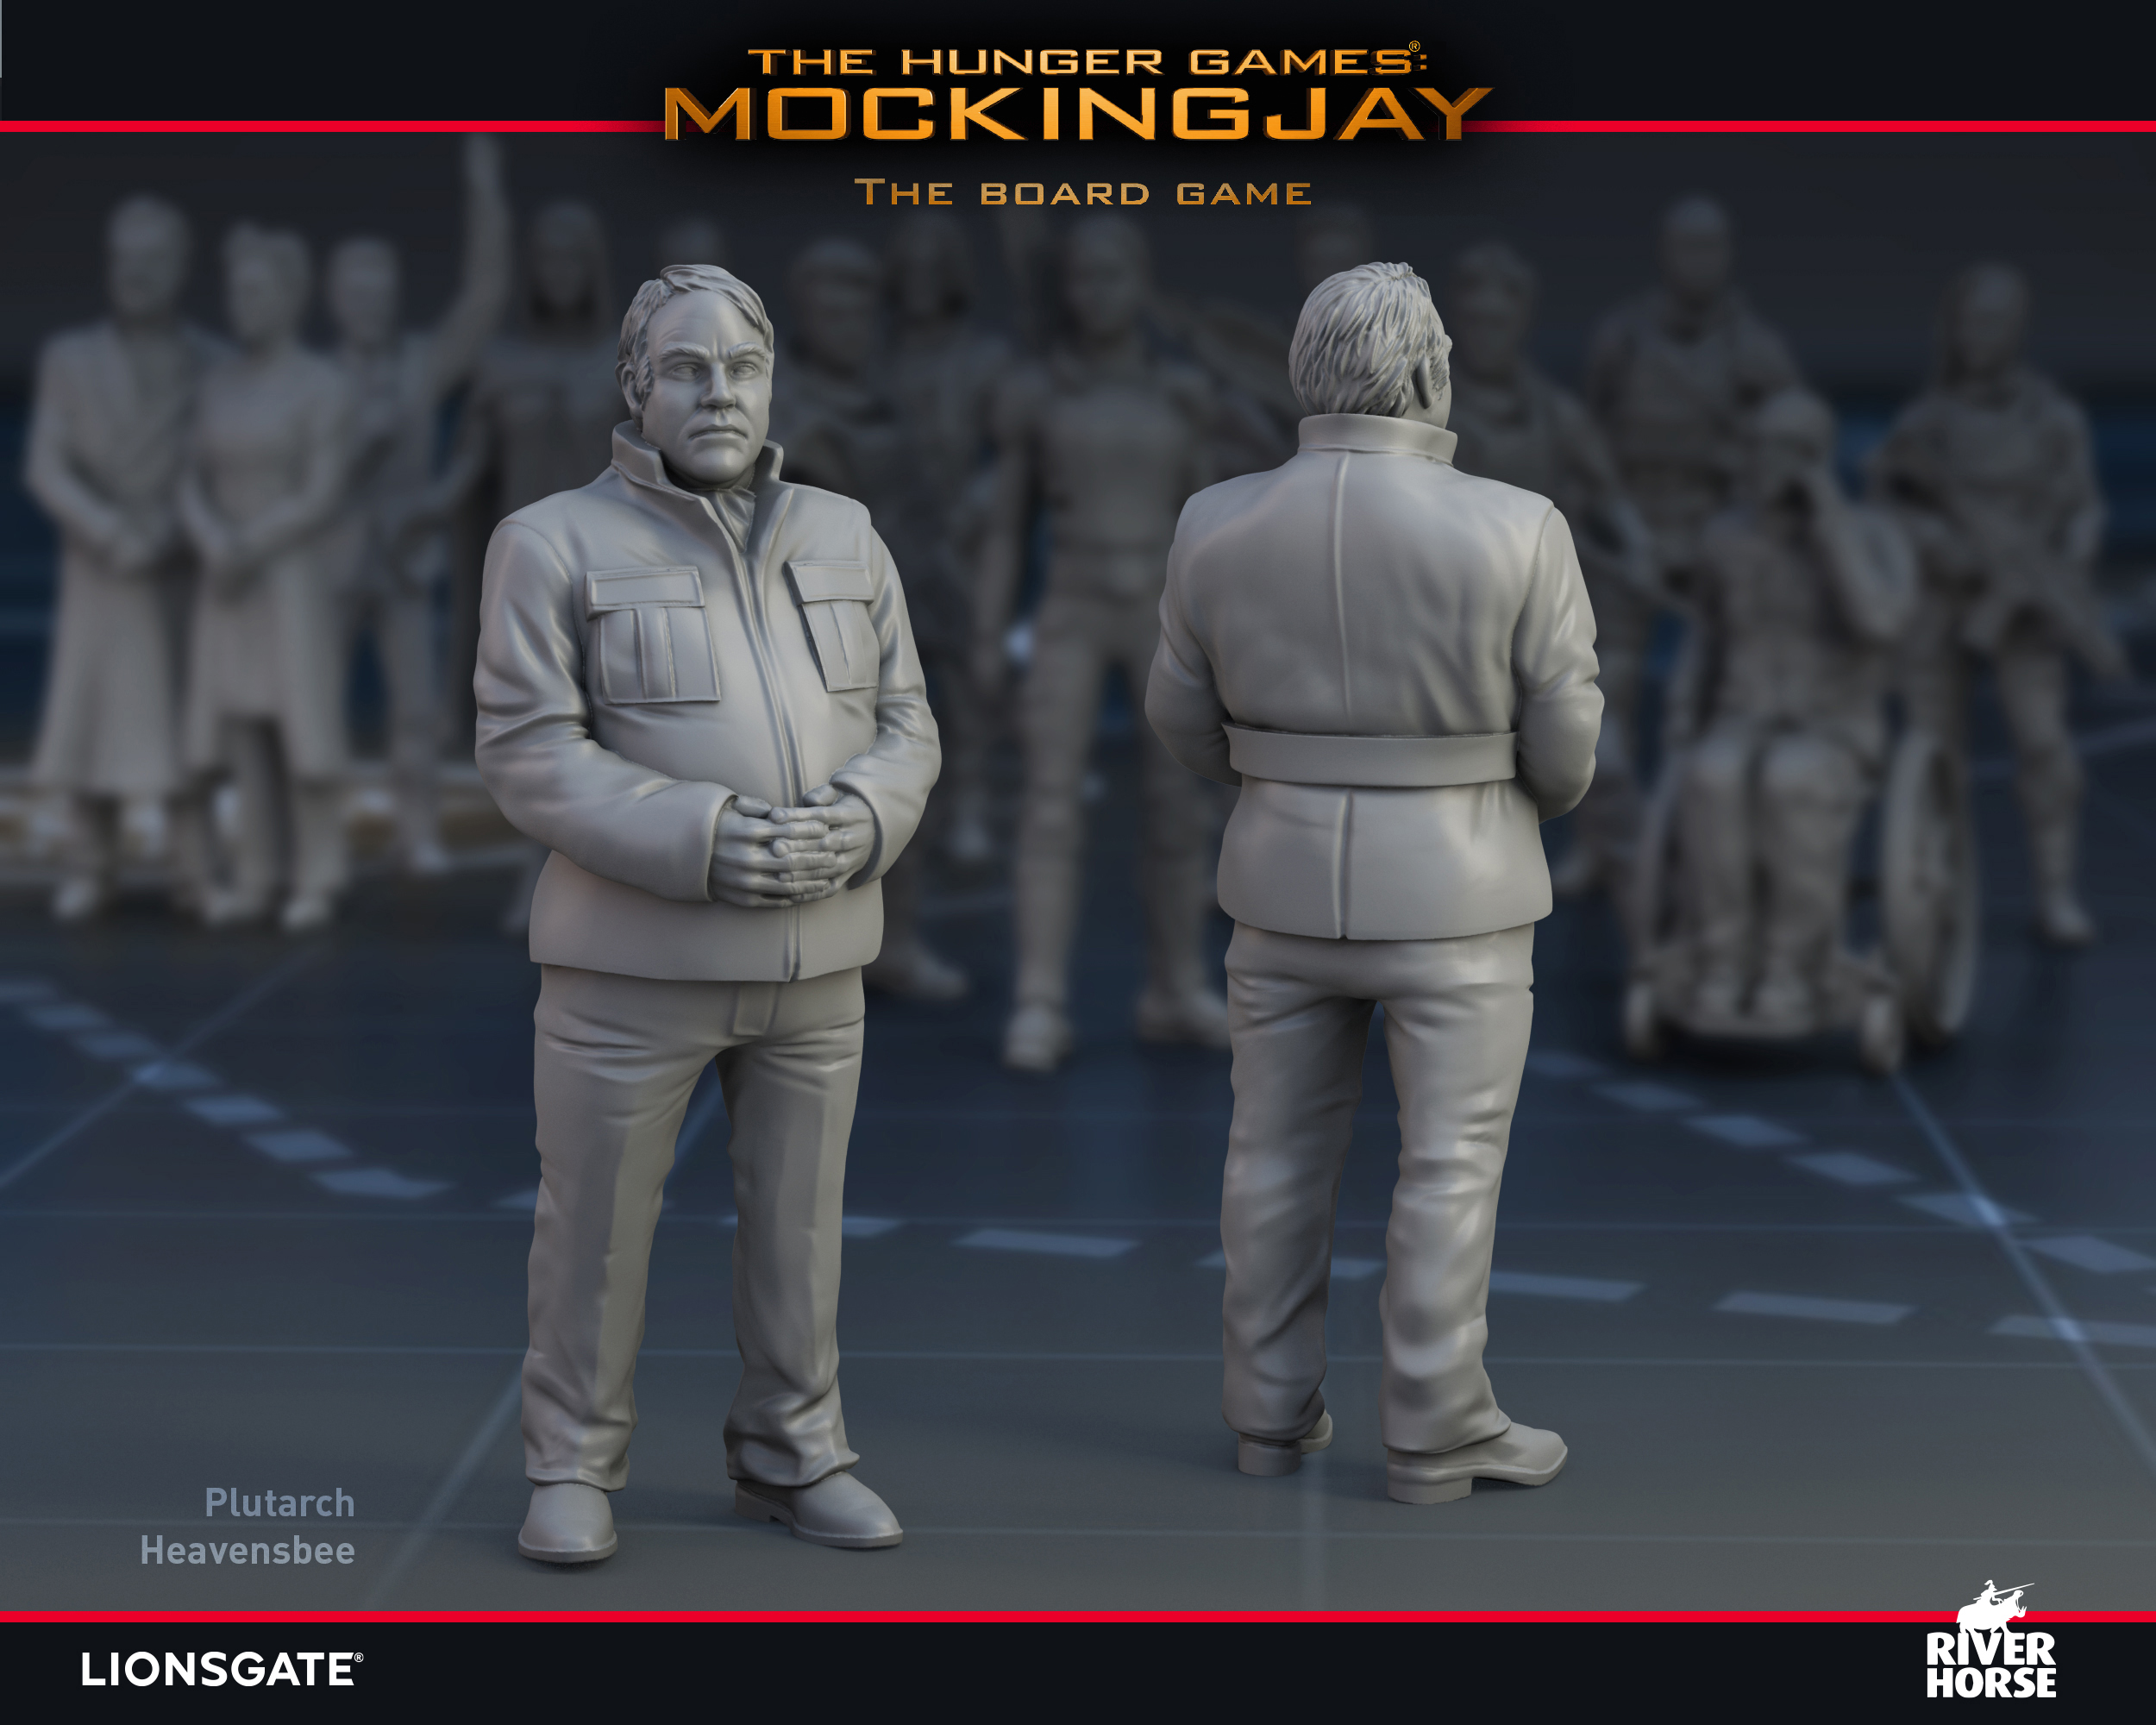 Render of Plutarch Heavensbee for The Hunger Games: Mockingjay - The Board Game by River Horse